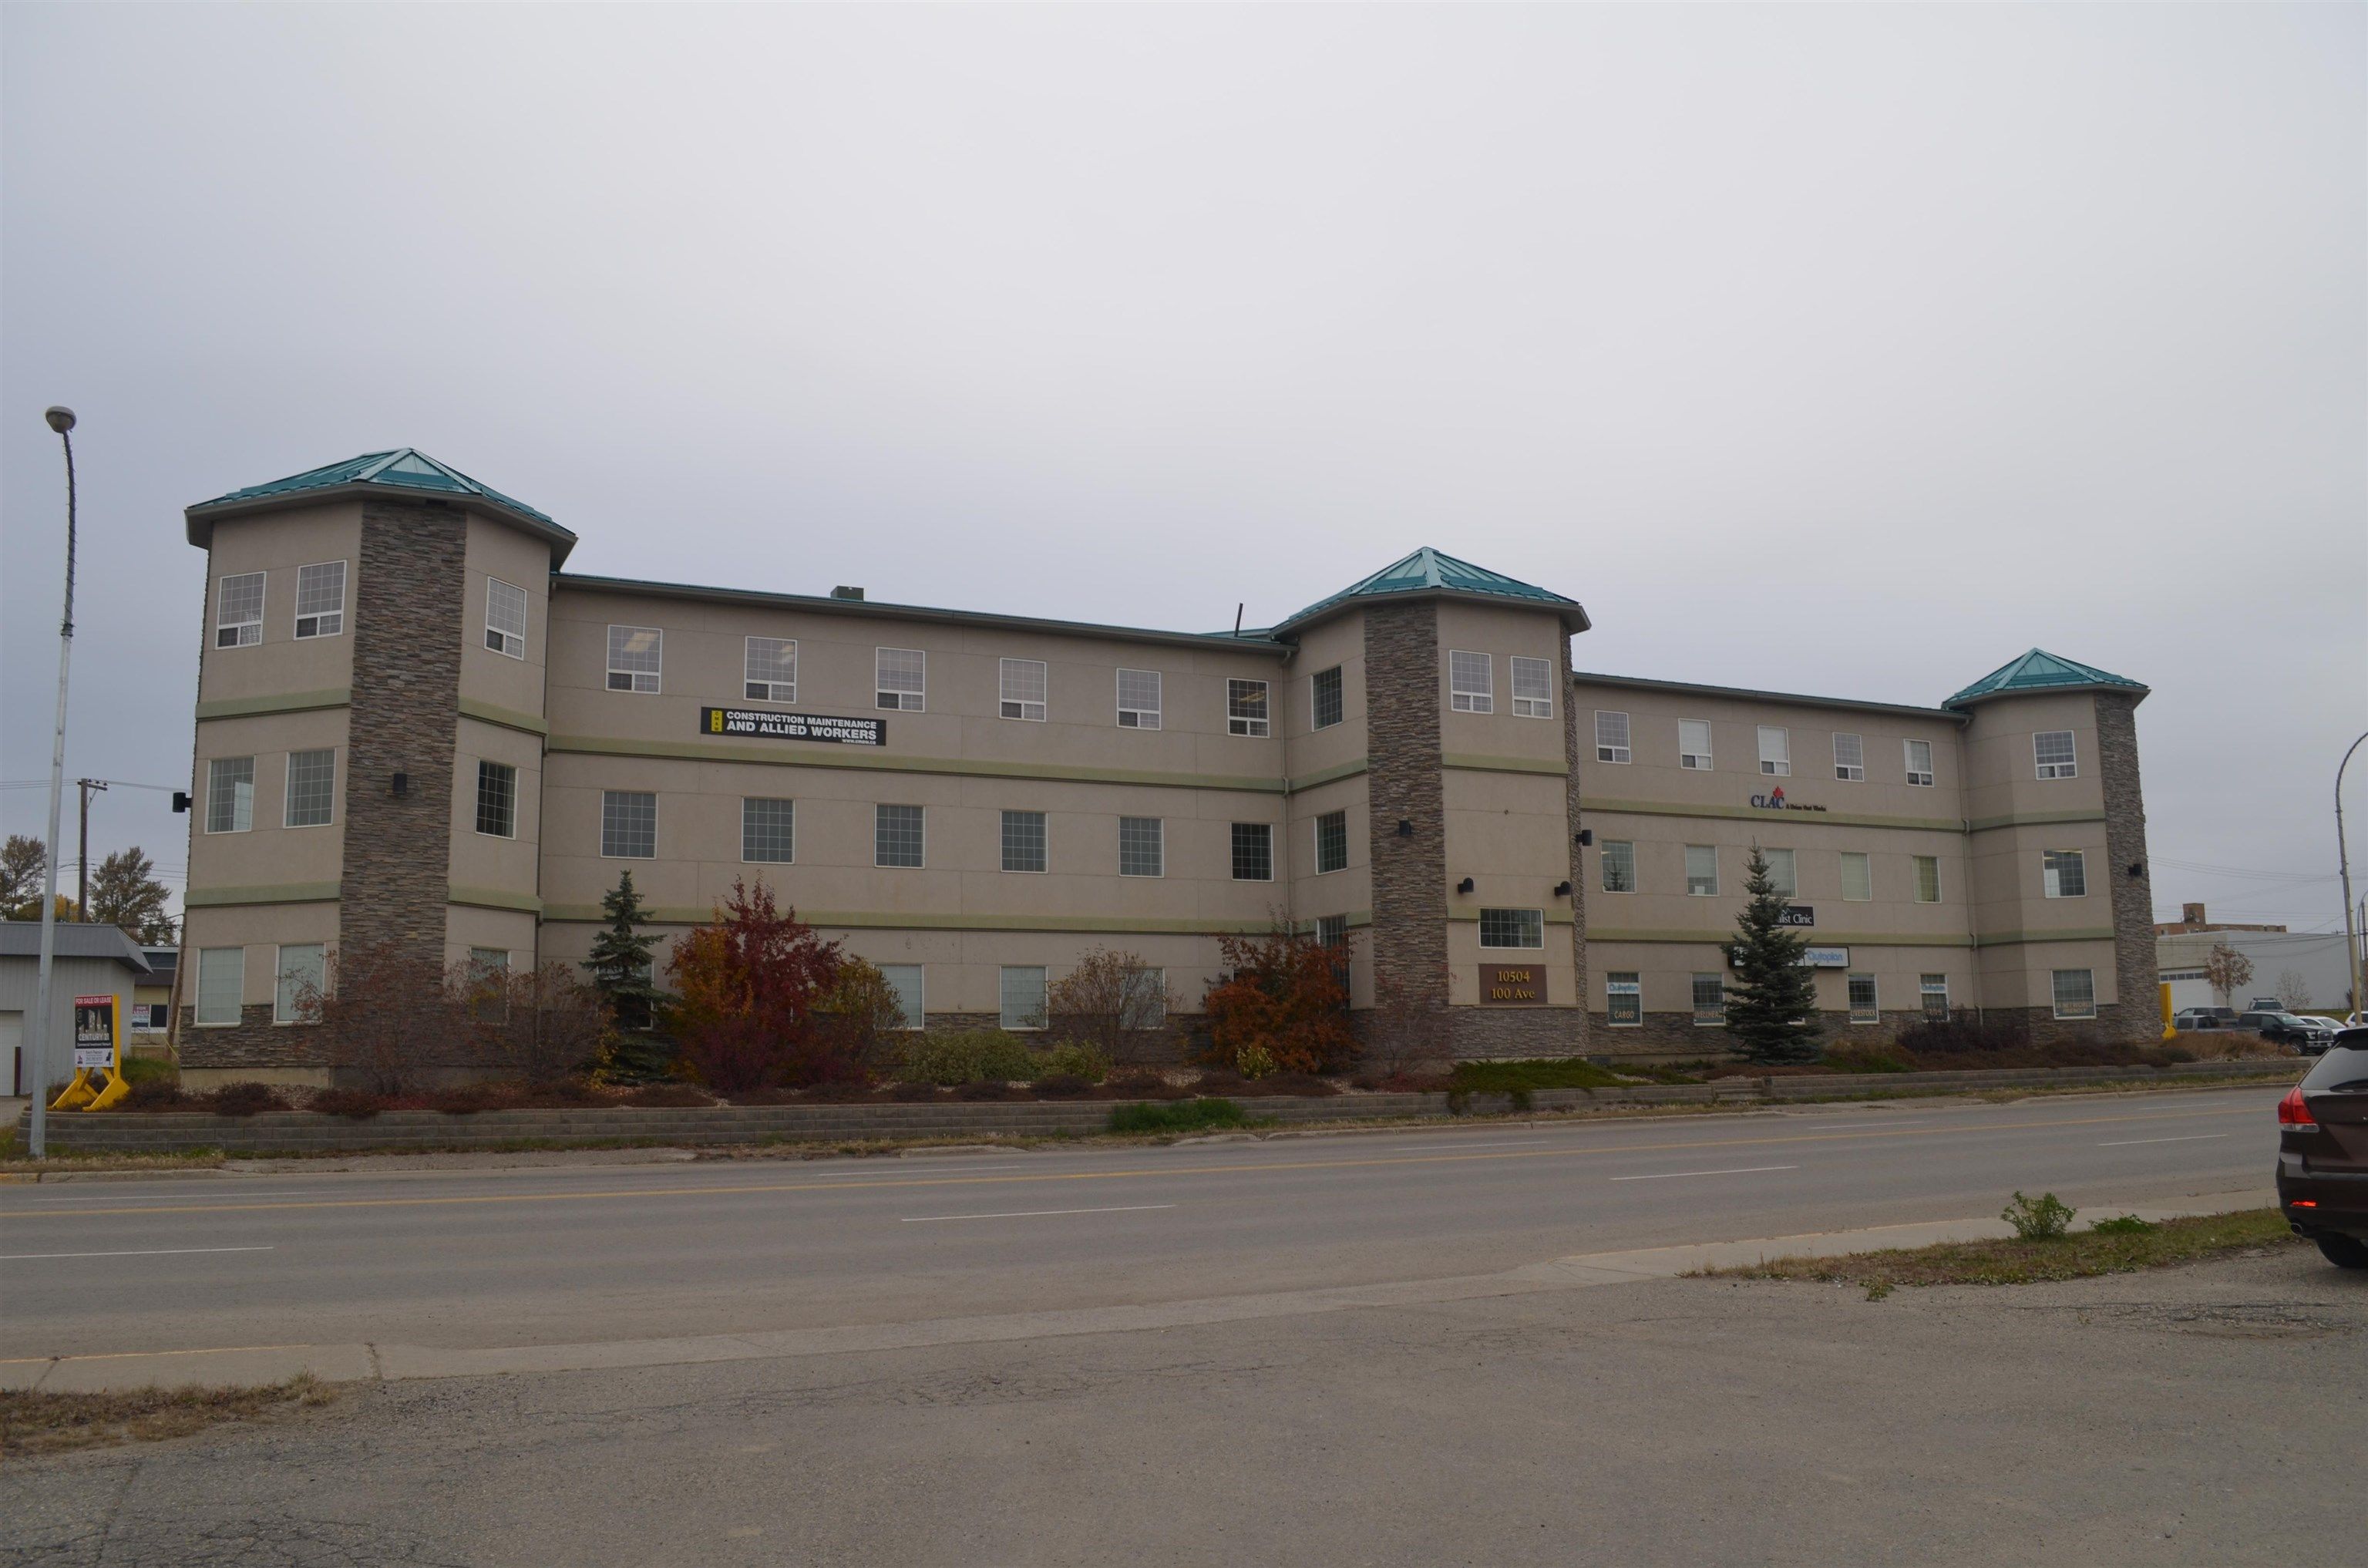 Main Photo: Office Property for lease Fort st. John - Kevin Pearson realtor